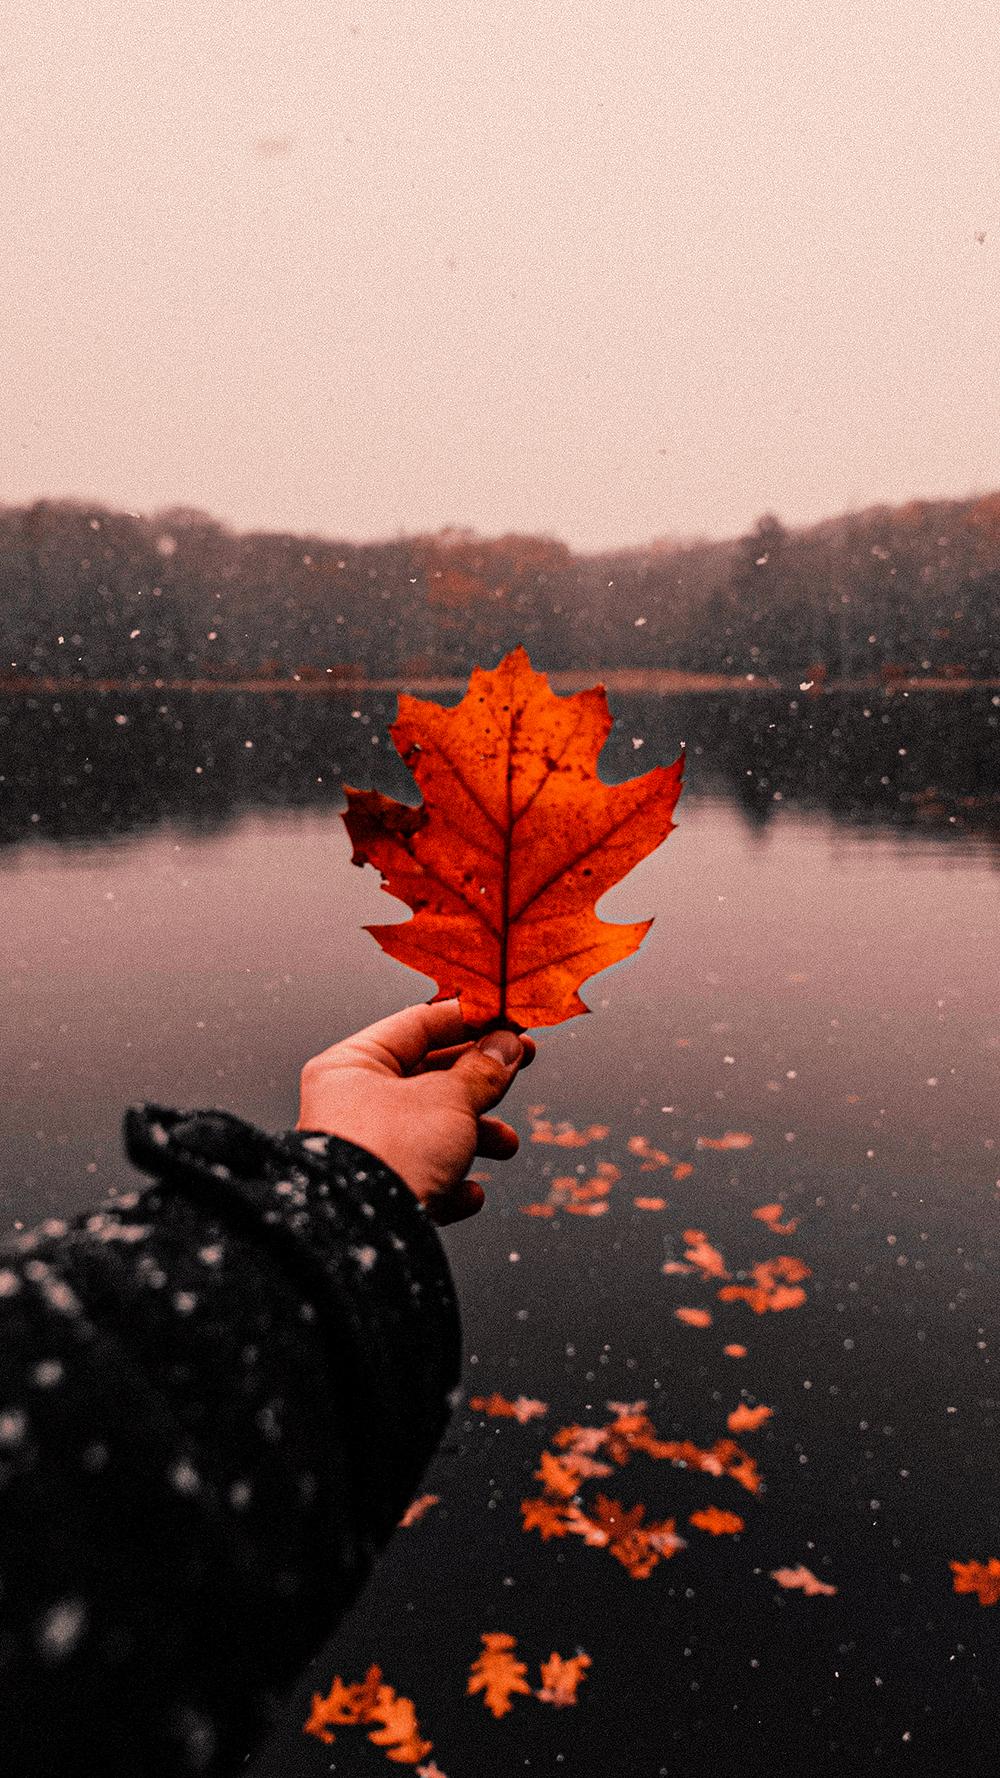 aesthetic-fall-wallpaper-images-49